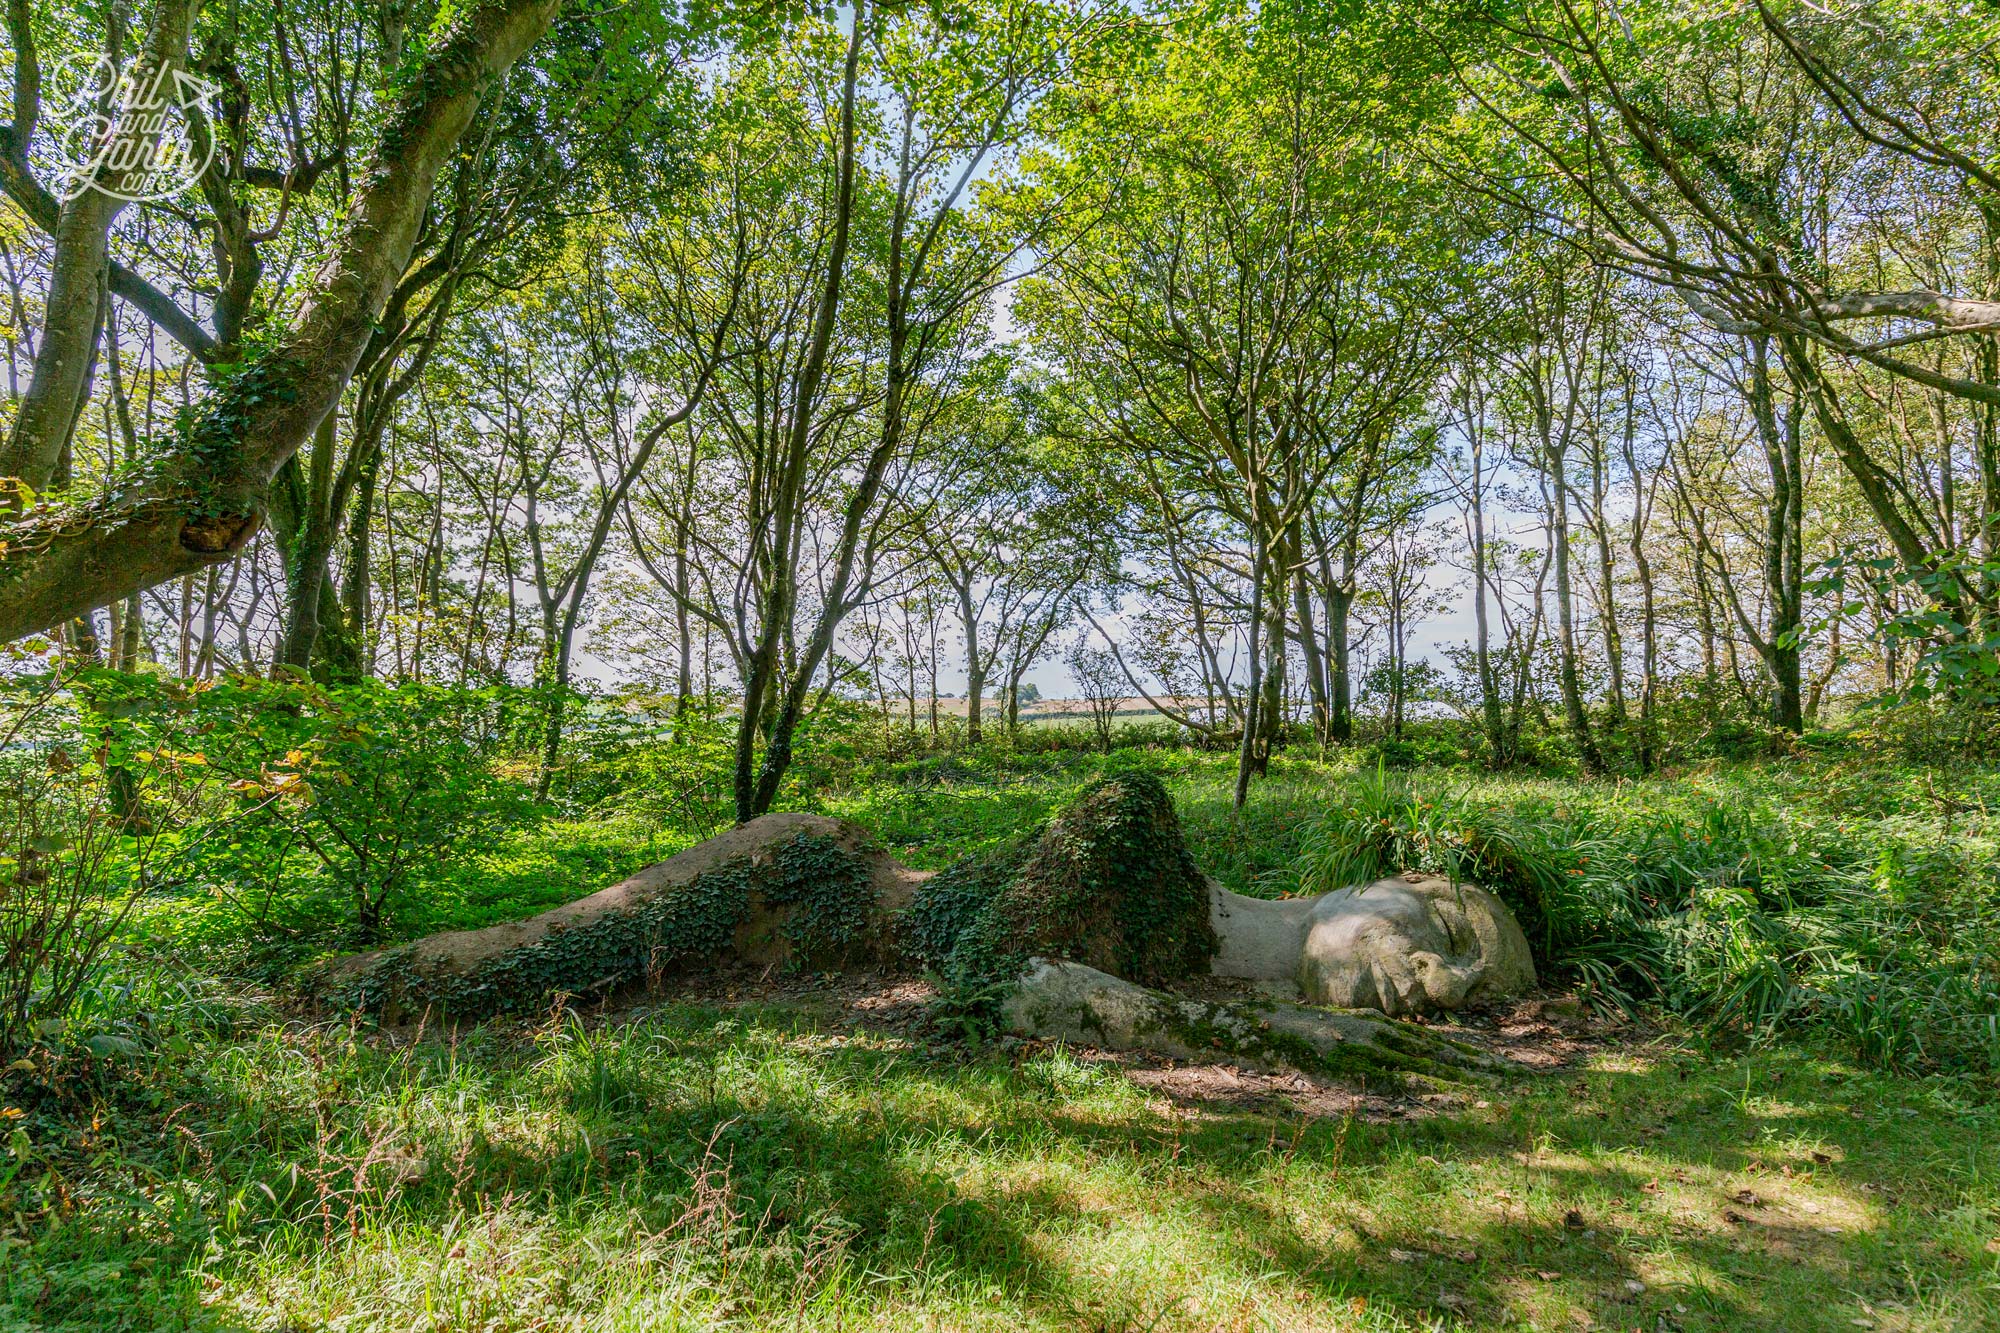 The Lost Gardens of Heligan's famous Mud Maid sleeping in the woodland